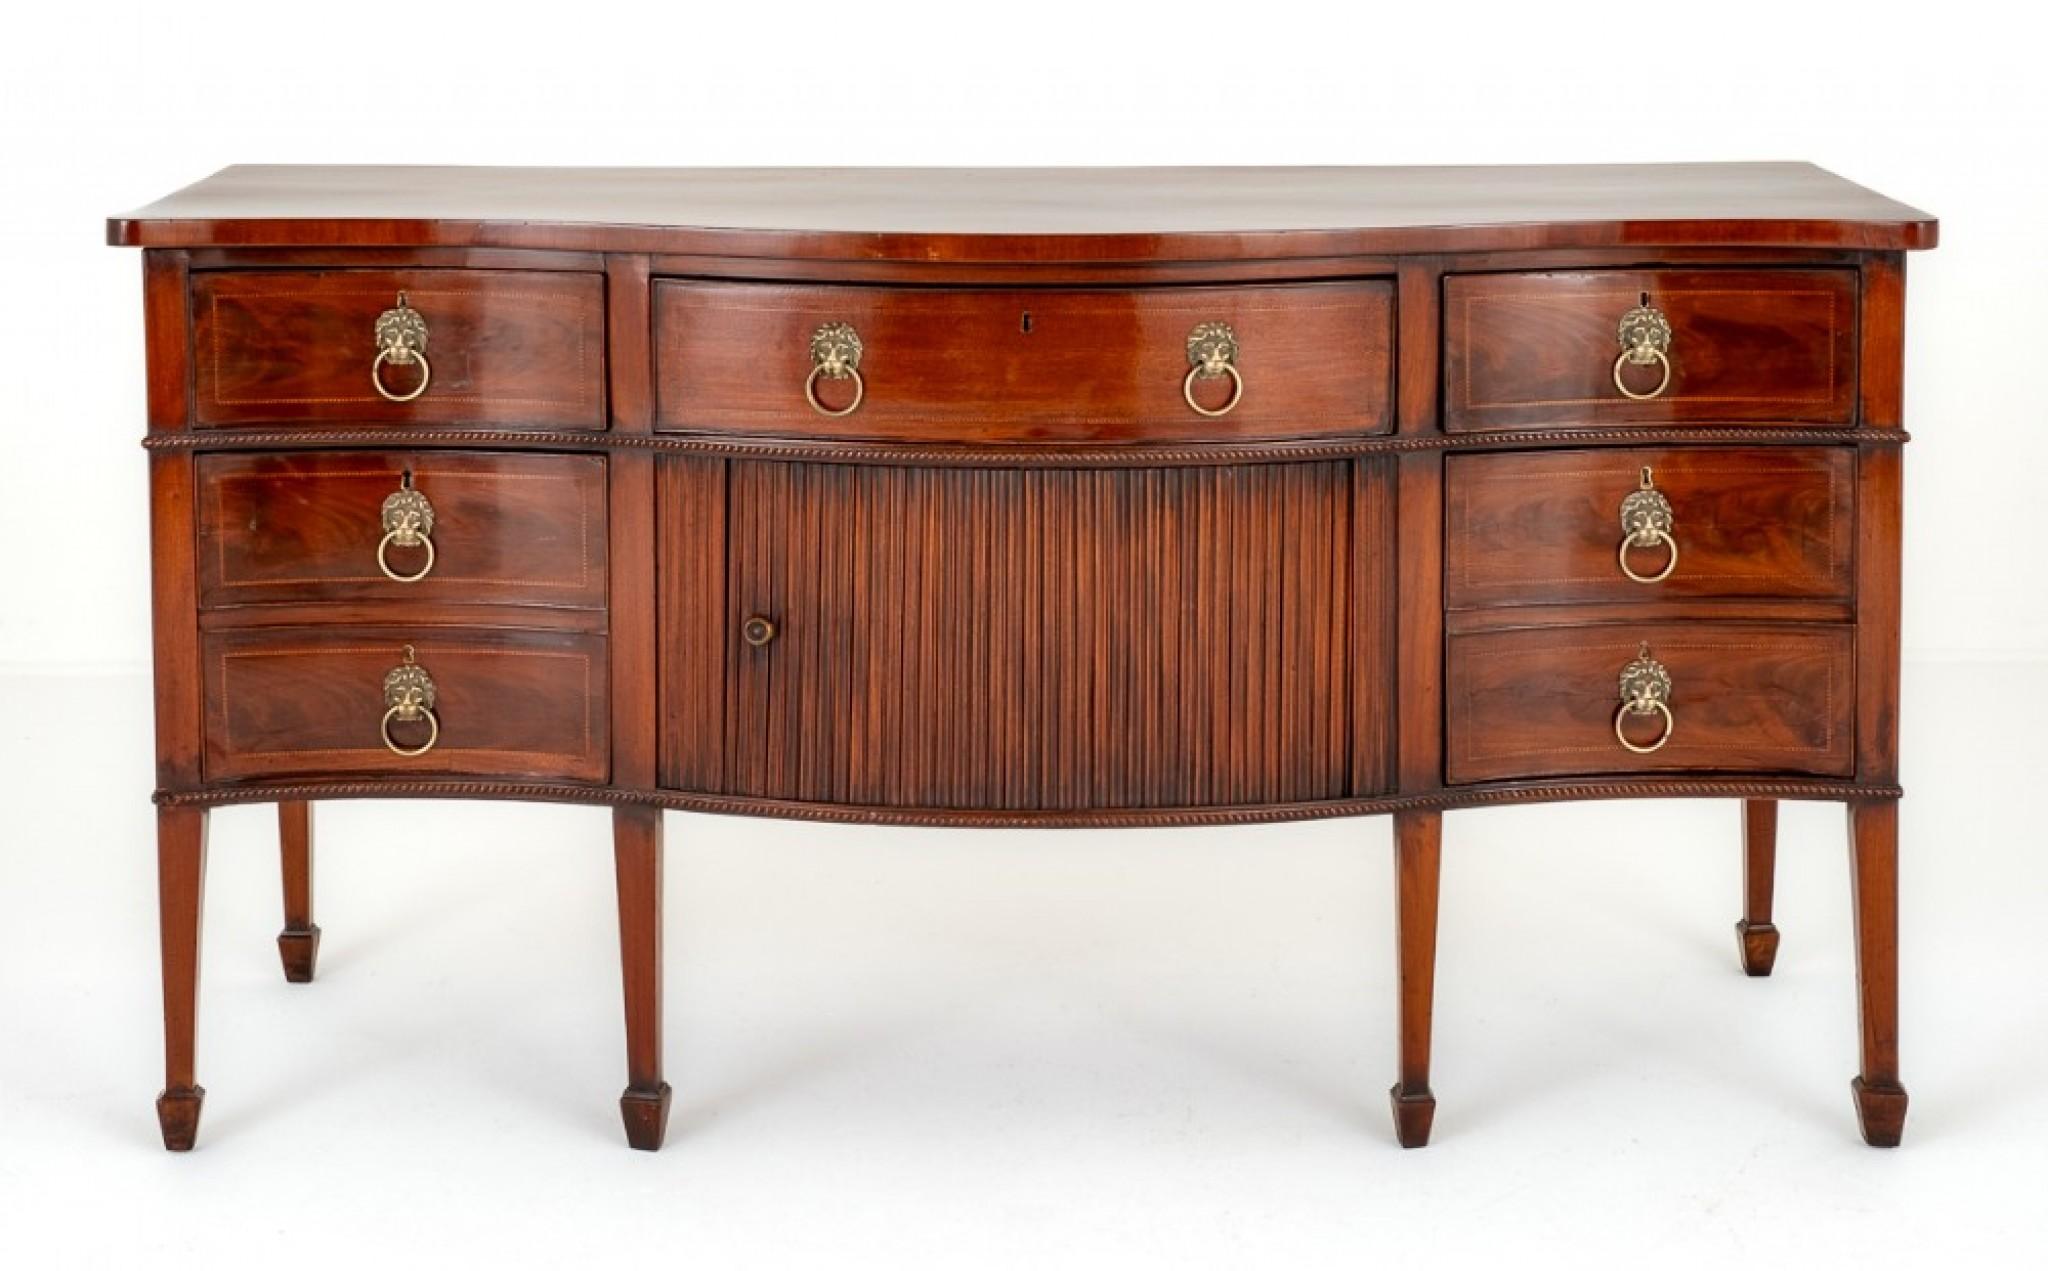 Good Georgian Mahogany Serpentine Sideboard.
This Sideboard Stands Upon Tapered Legs with Spade Feet.
Circa 1800
Having an Arrangement of 5 Oak Lined Drawers.
Each Drawer Having Chequered Inlays and Impressive Lions Head Ring Pull Handles.
The